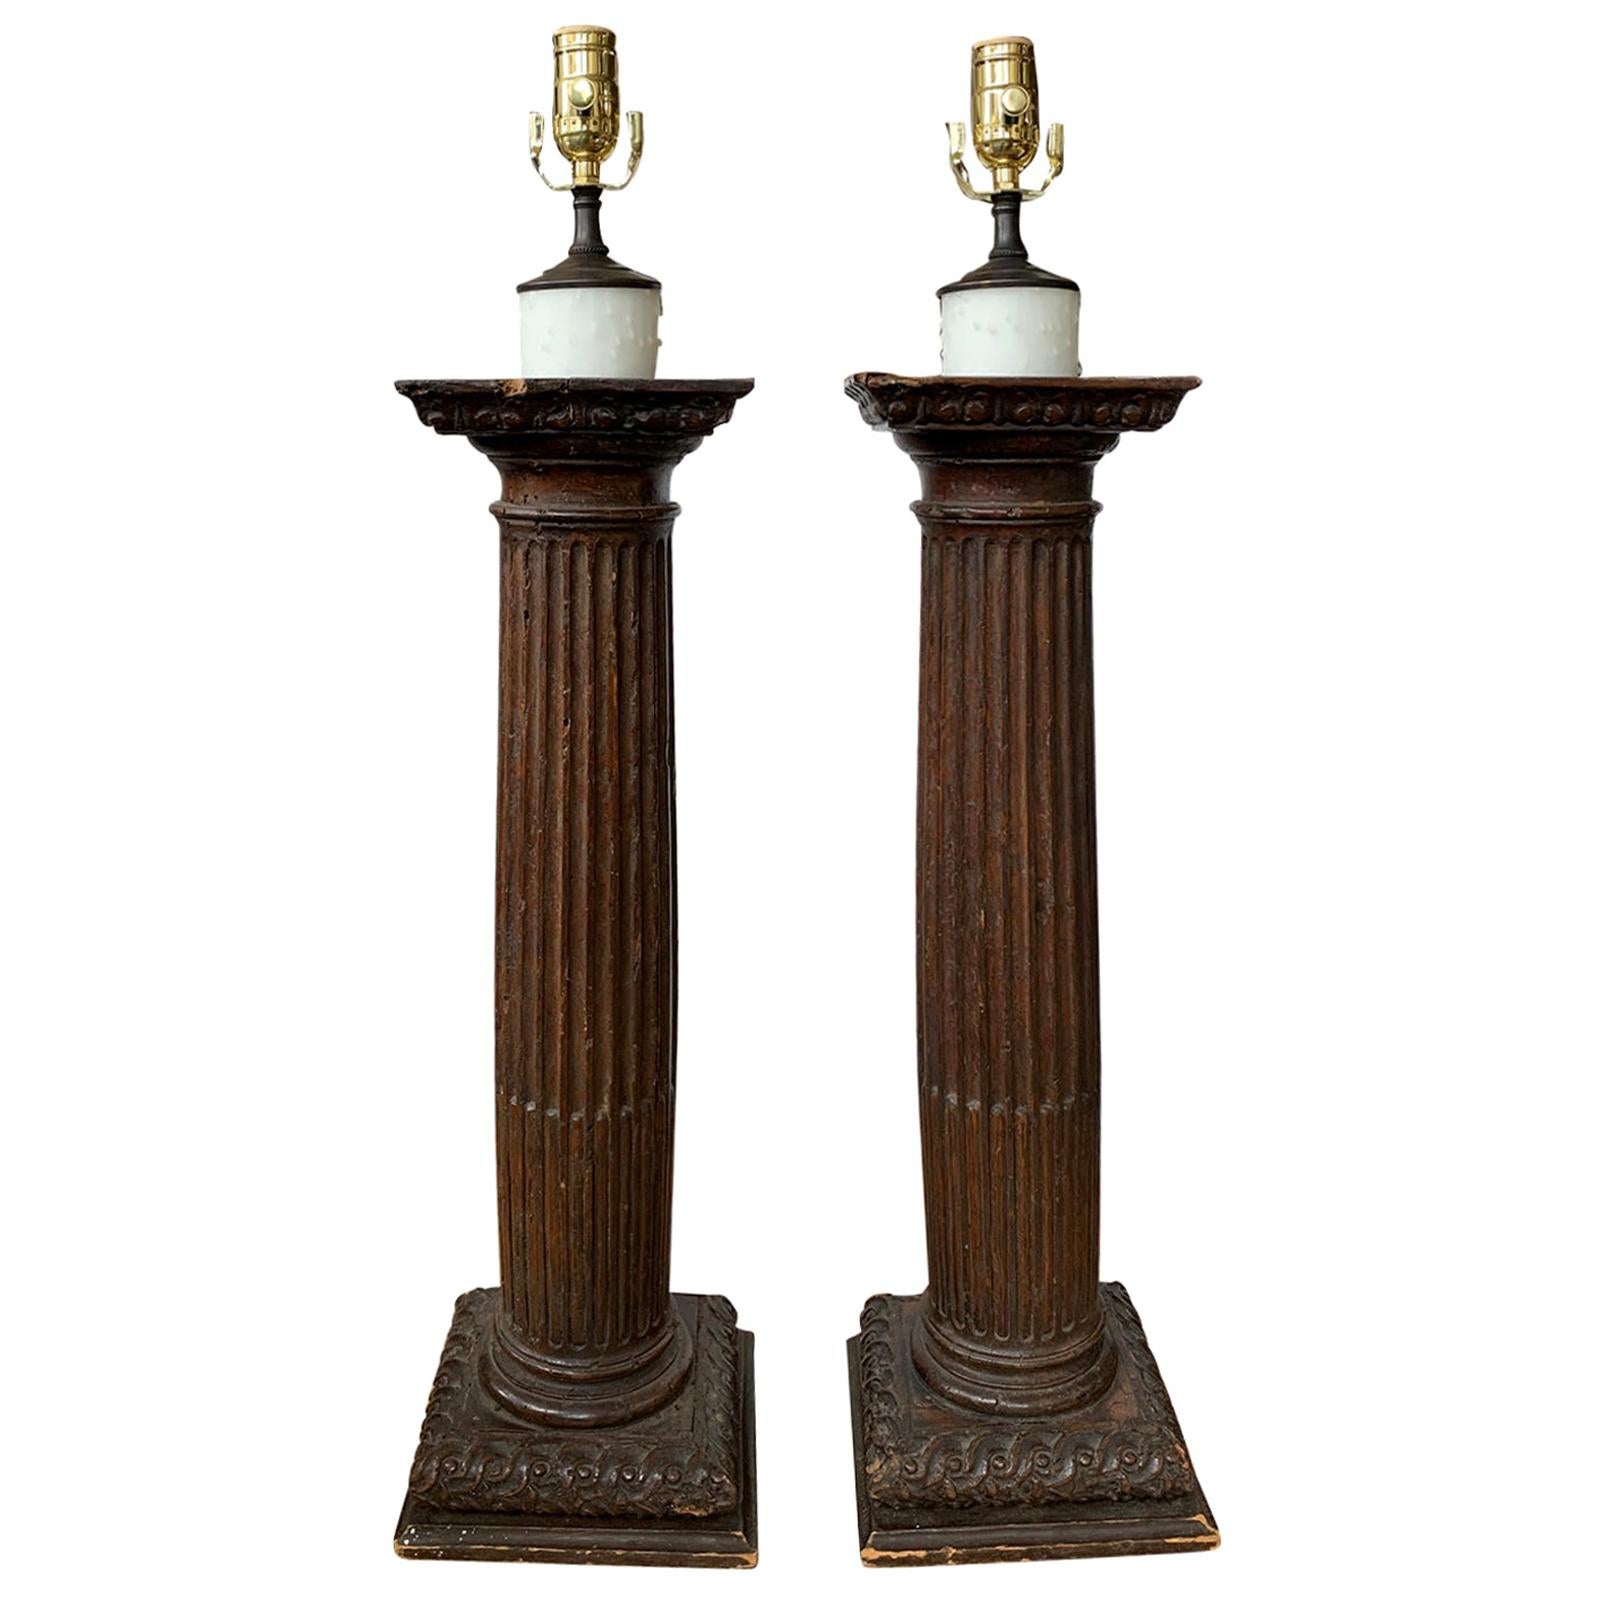 Pair of 18th Century Italian Carved Wooden Columns as Lamps